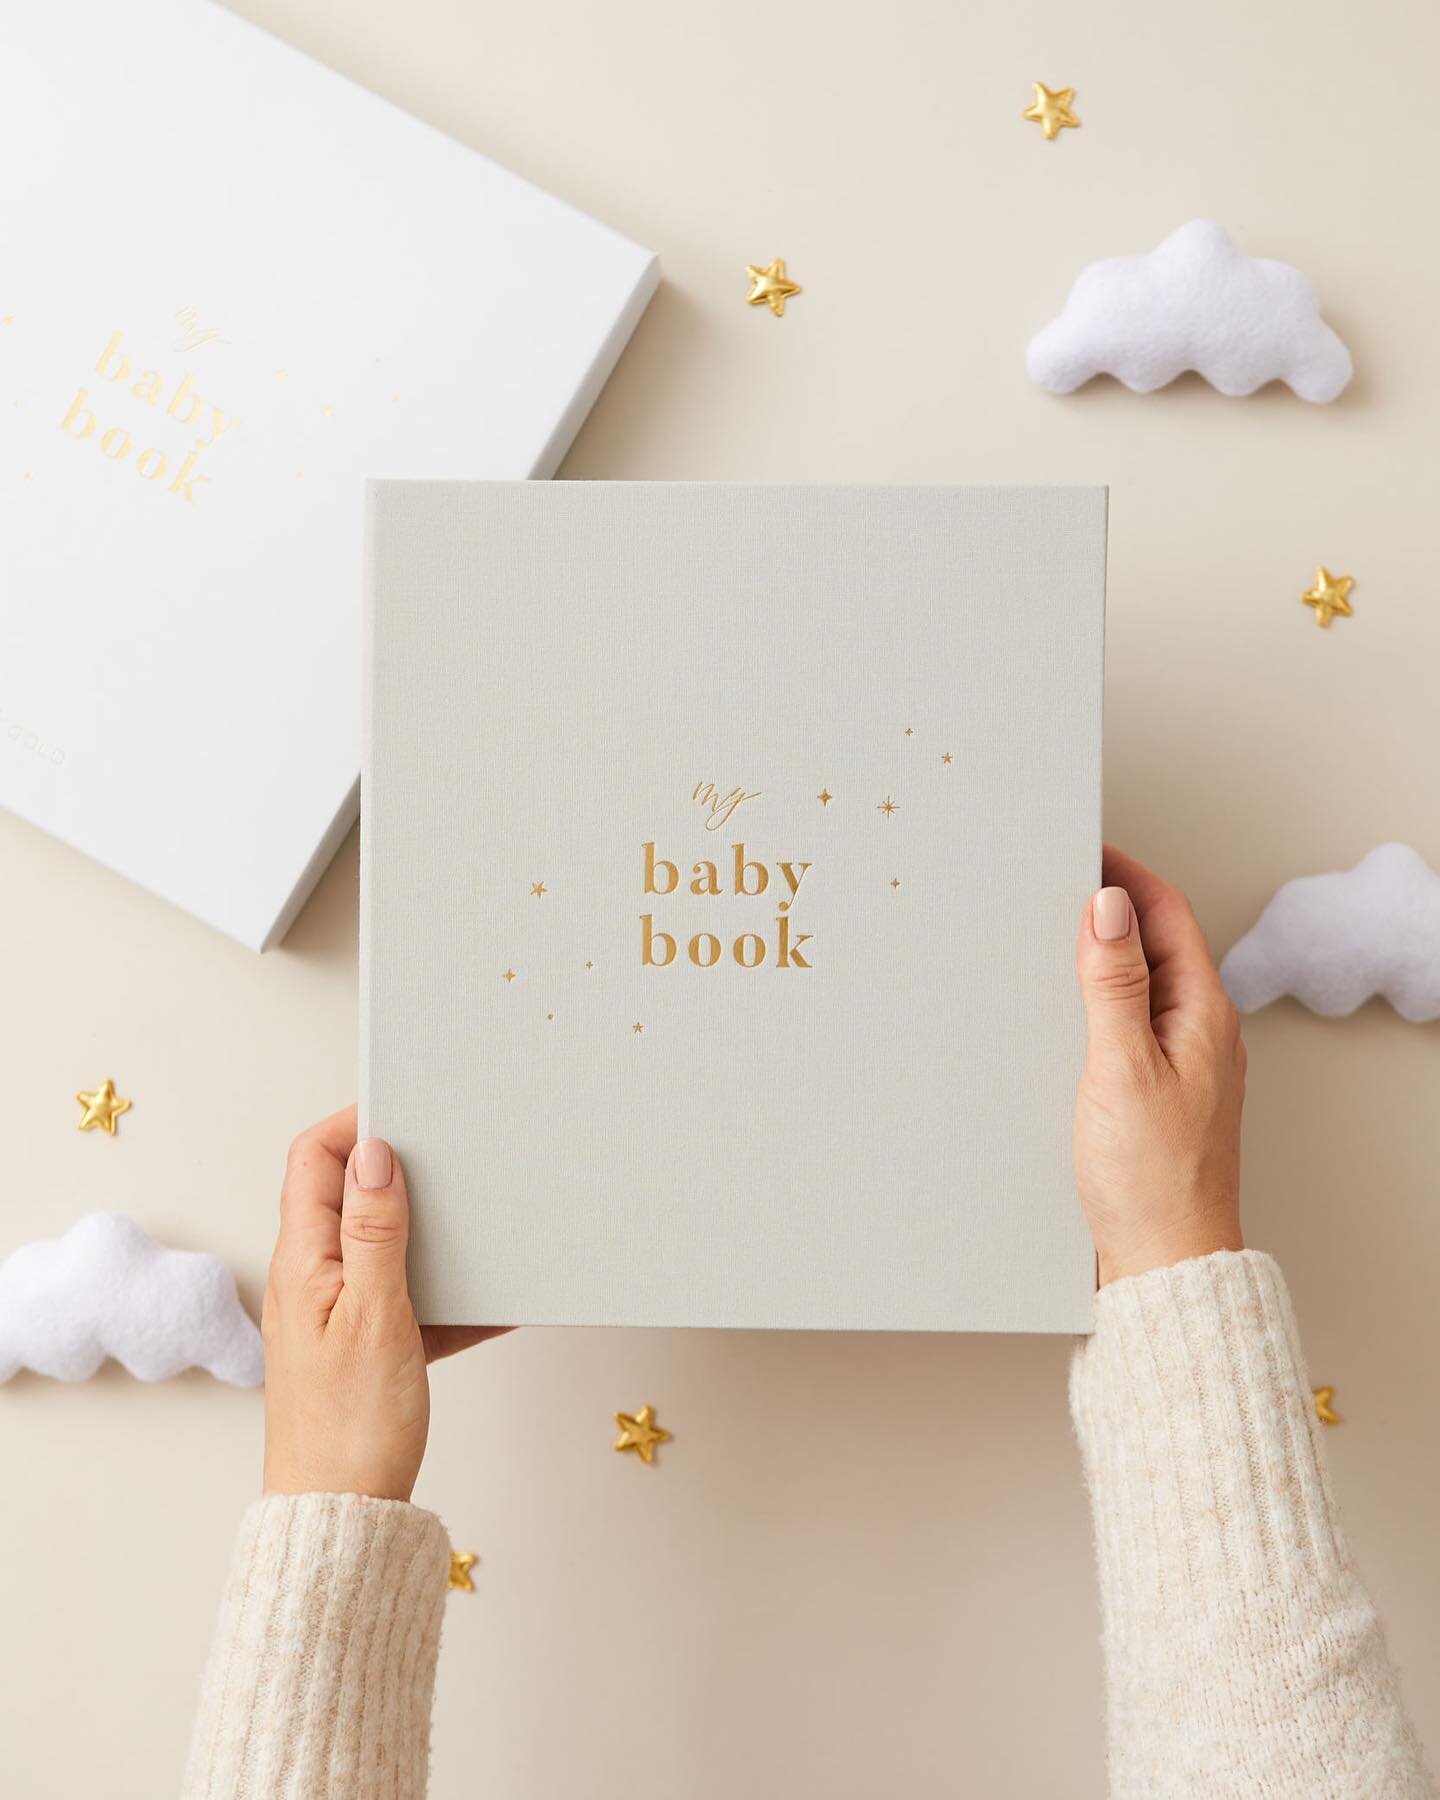 After the amazing response to the new journal designs now available, I thought it would be helpful to share 5 simple baby memory book tips to help you busy mums that have got a new journal winging its way to you! 

1. KEEP IT IN PLAIN SIGHT 👀 

Than